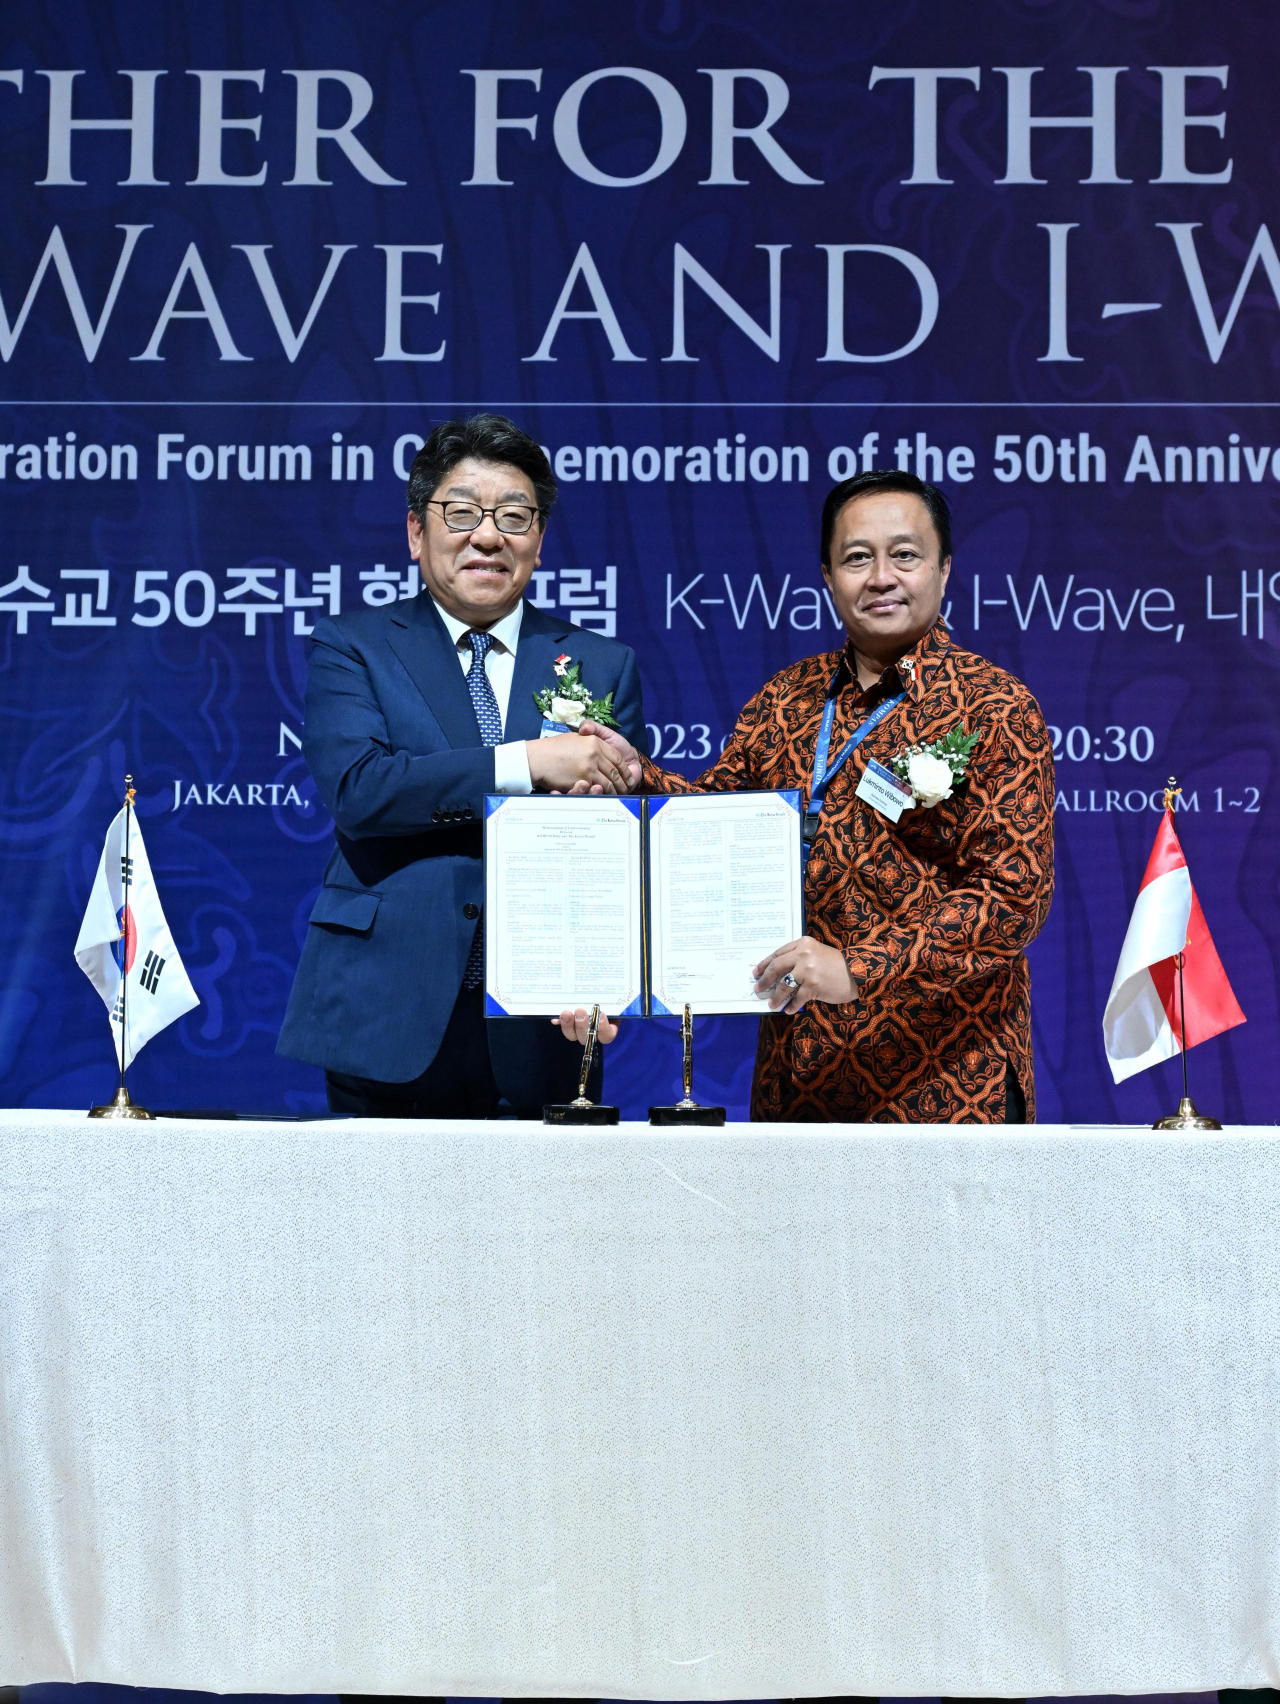 Korea Herald CEO Choi Jin-young (left) and KOMPAS Daily Business Director Lukminto Wibowo pose for a photo after signing a memorandum of understanding during the Korea-Indonesia Cooperation Forum held in Jakarta, Indonesia on Thursday. (Lee Sang-sub/The Korea Herald)